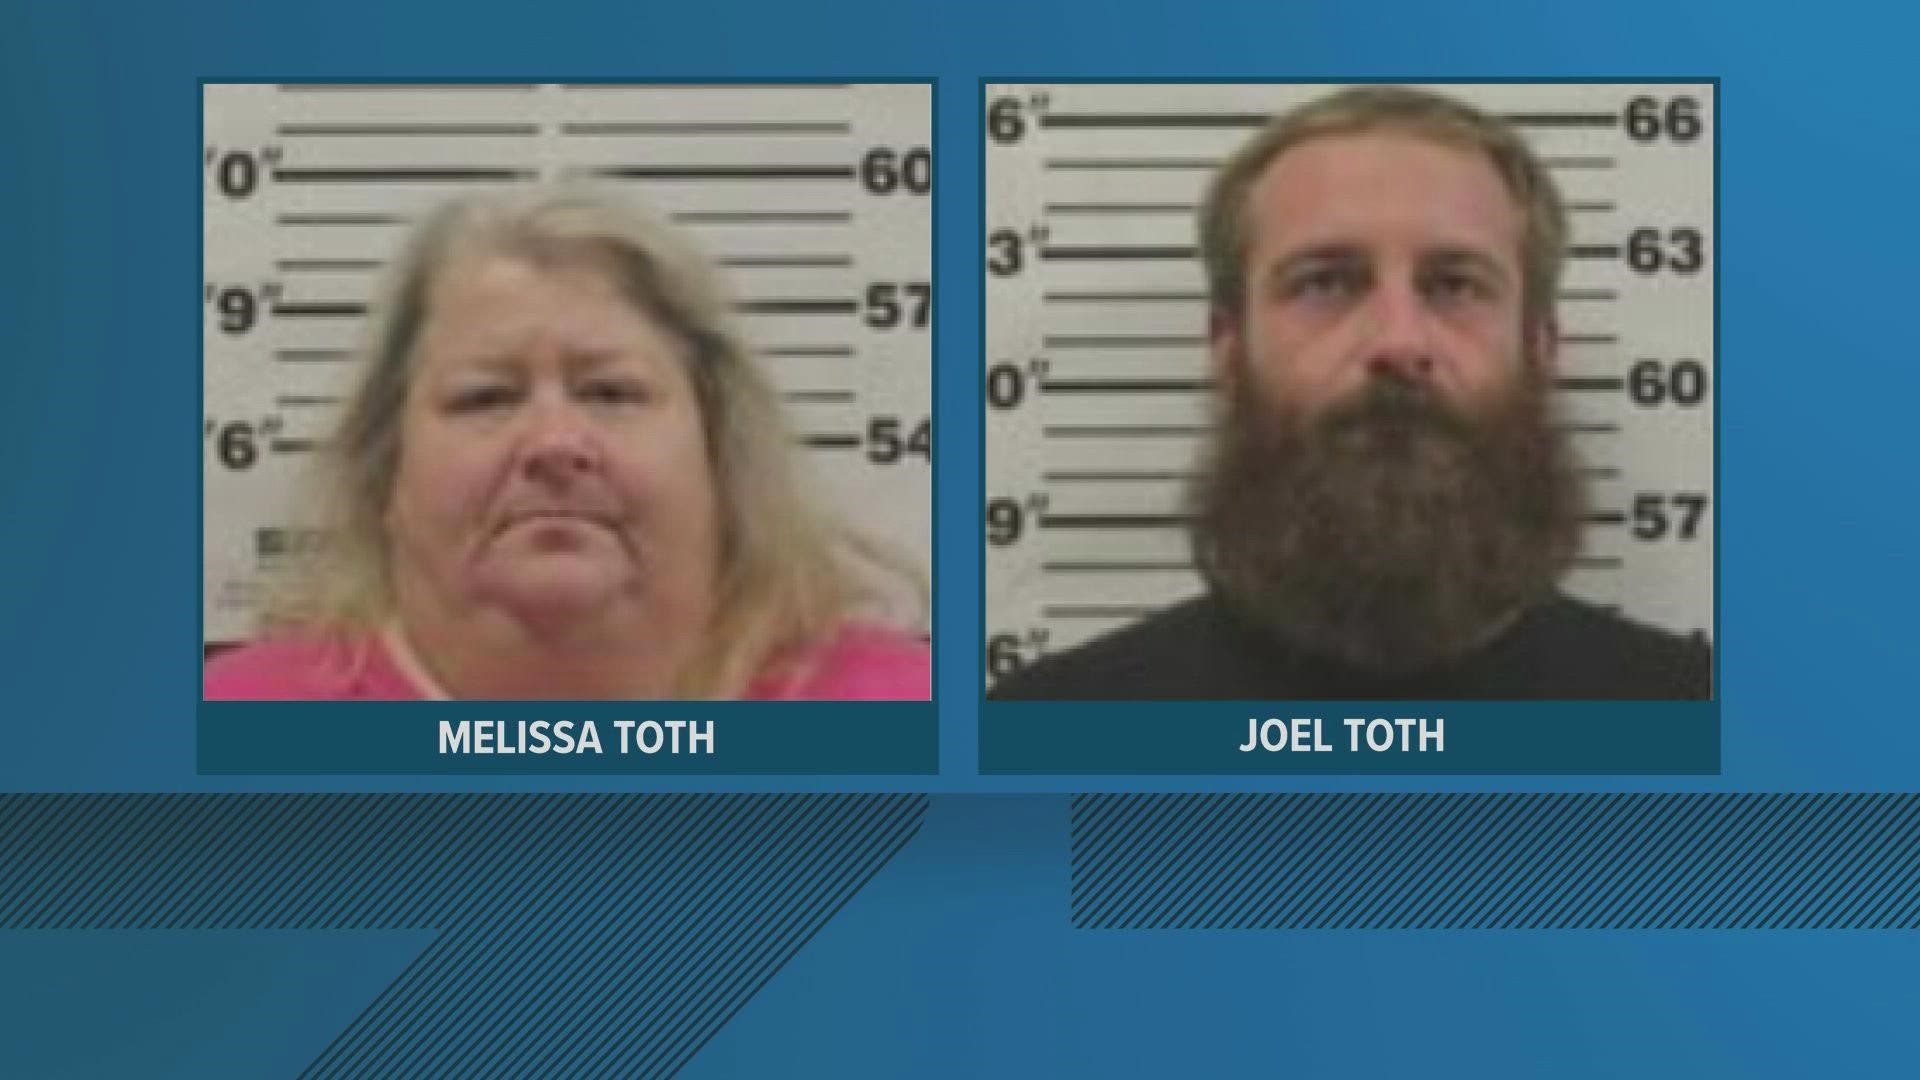 Joel Toth and his mother Melissa were arrested Friday after police said a two-year-old in their care was found wandering alone in Madison.